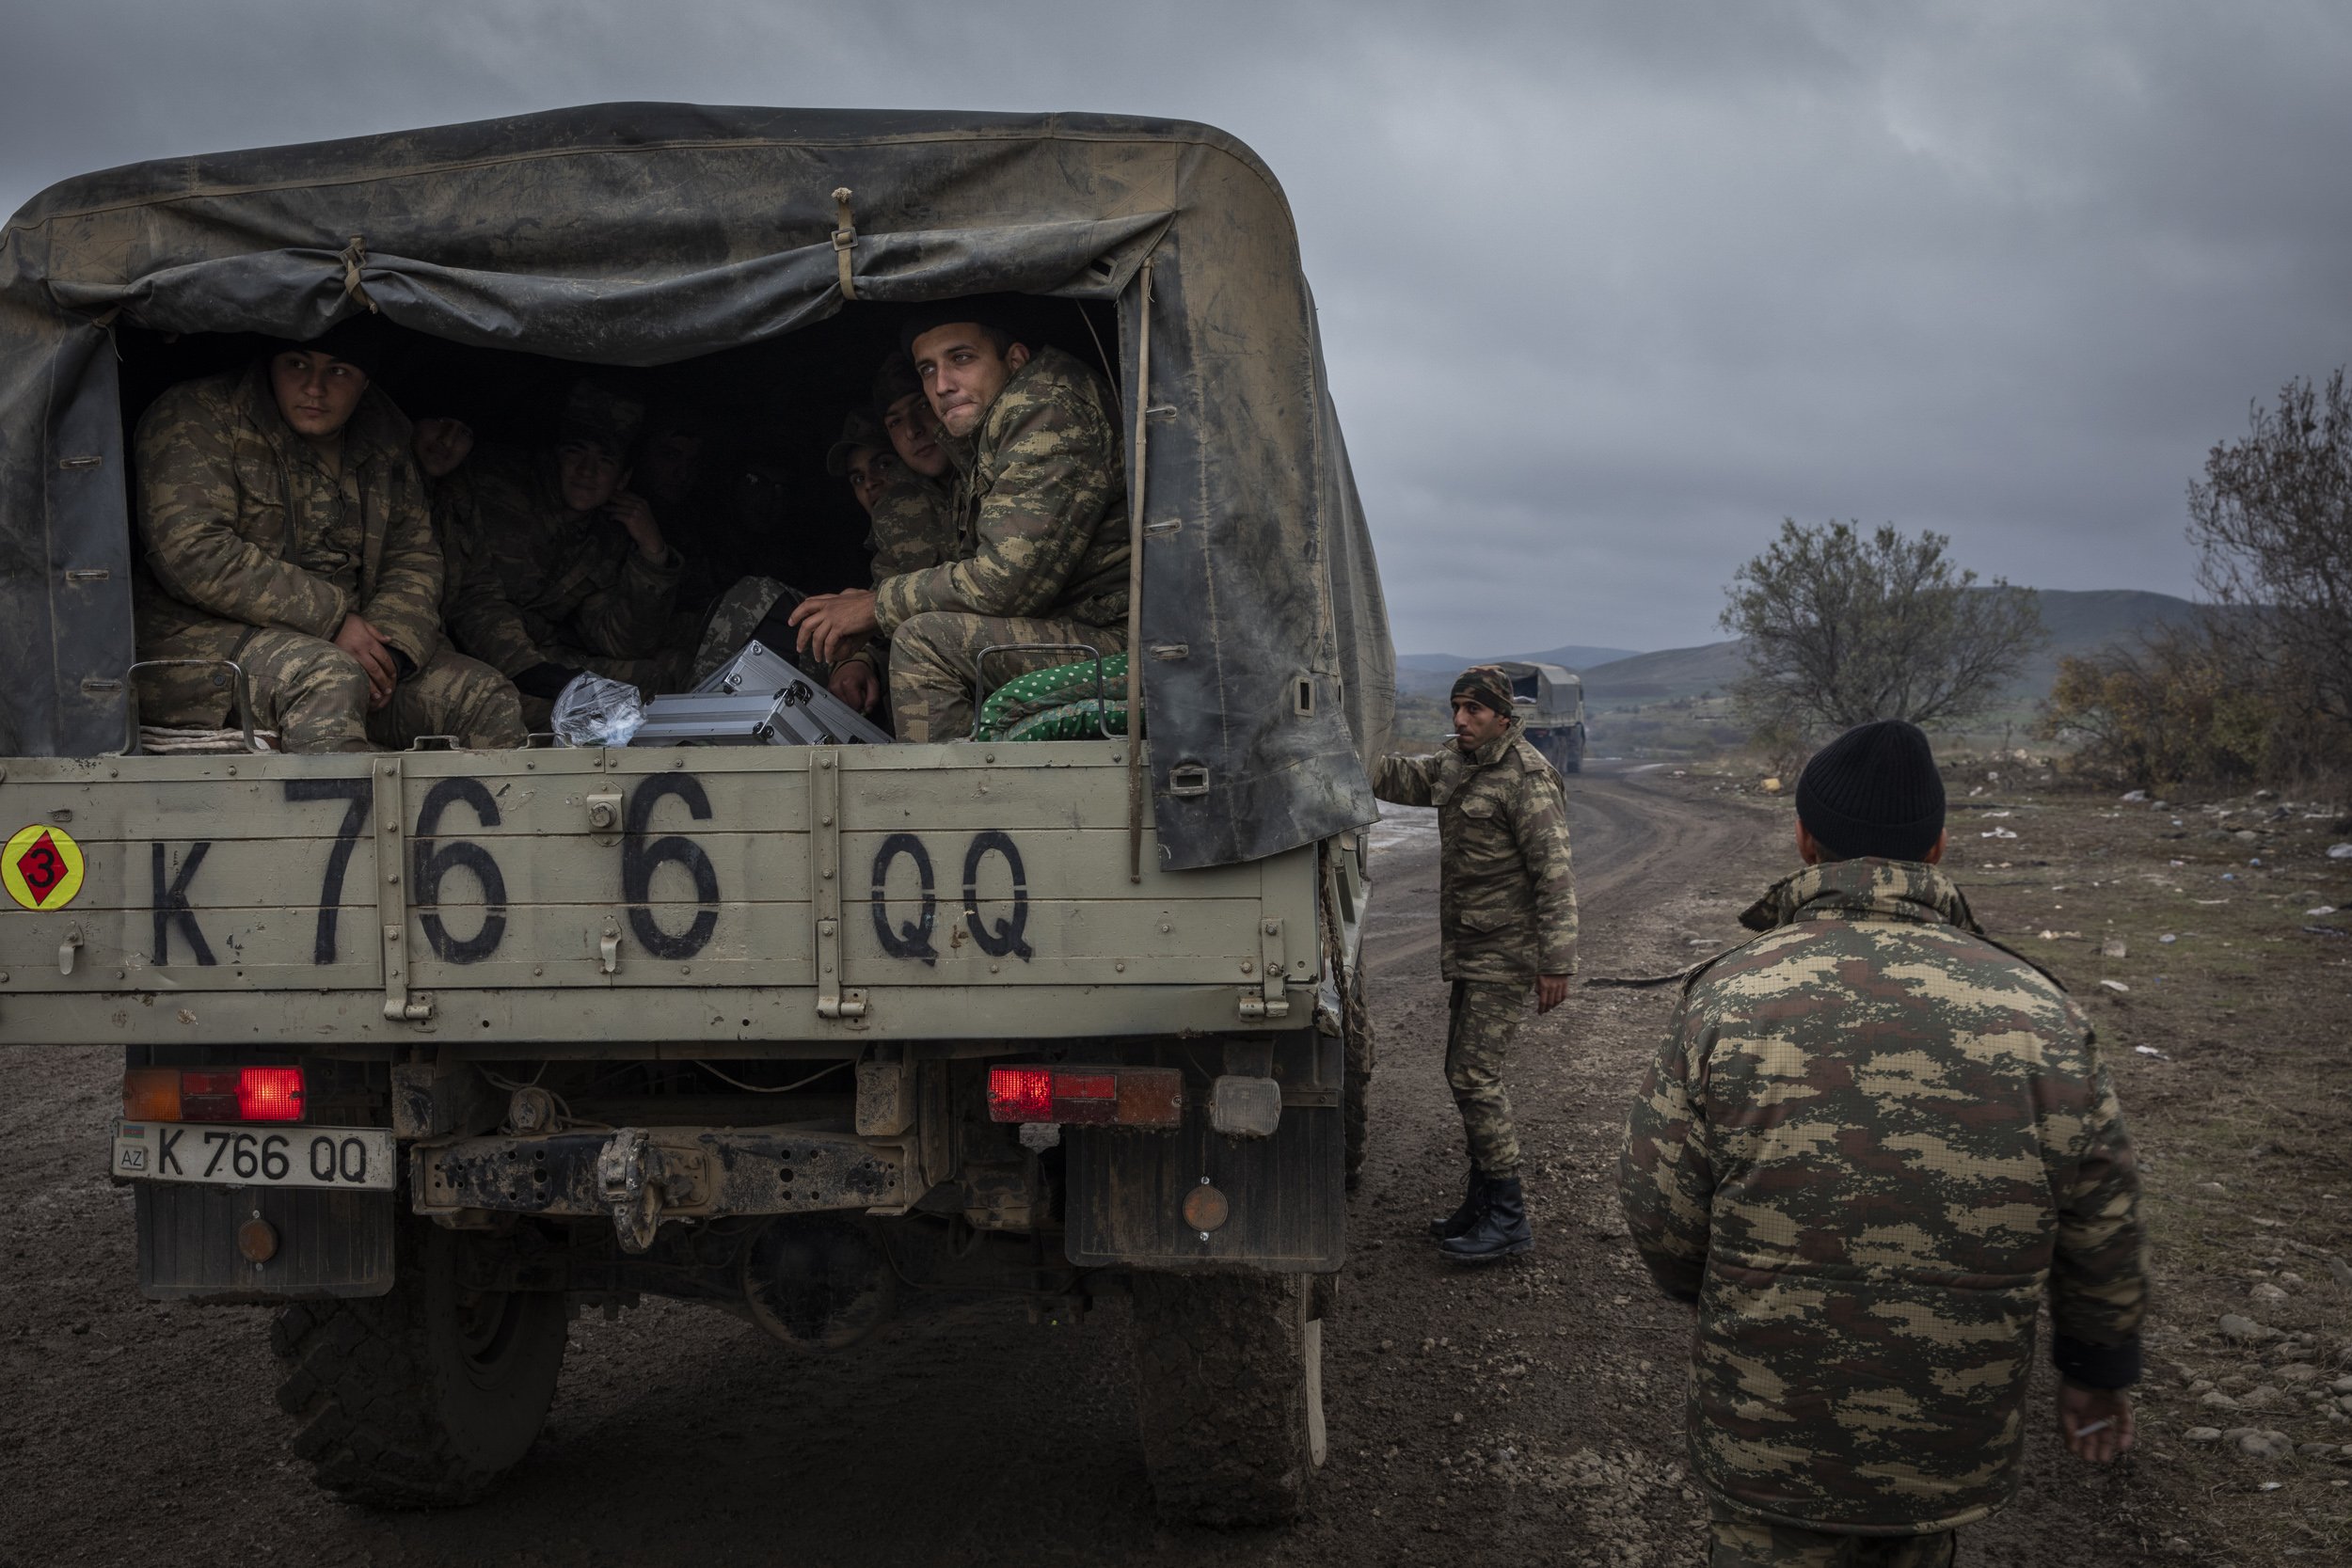  Azerbaijani troops returning from the frontline stopped on the side of the road outside the town of Fizuli. 